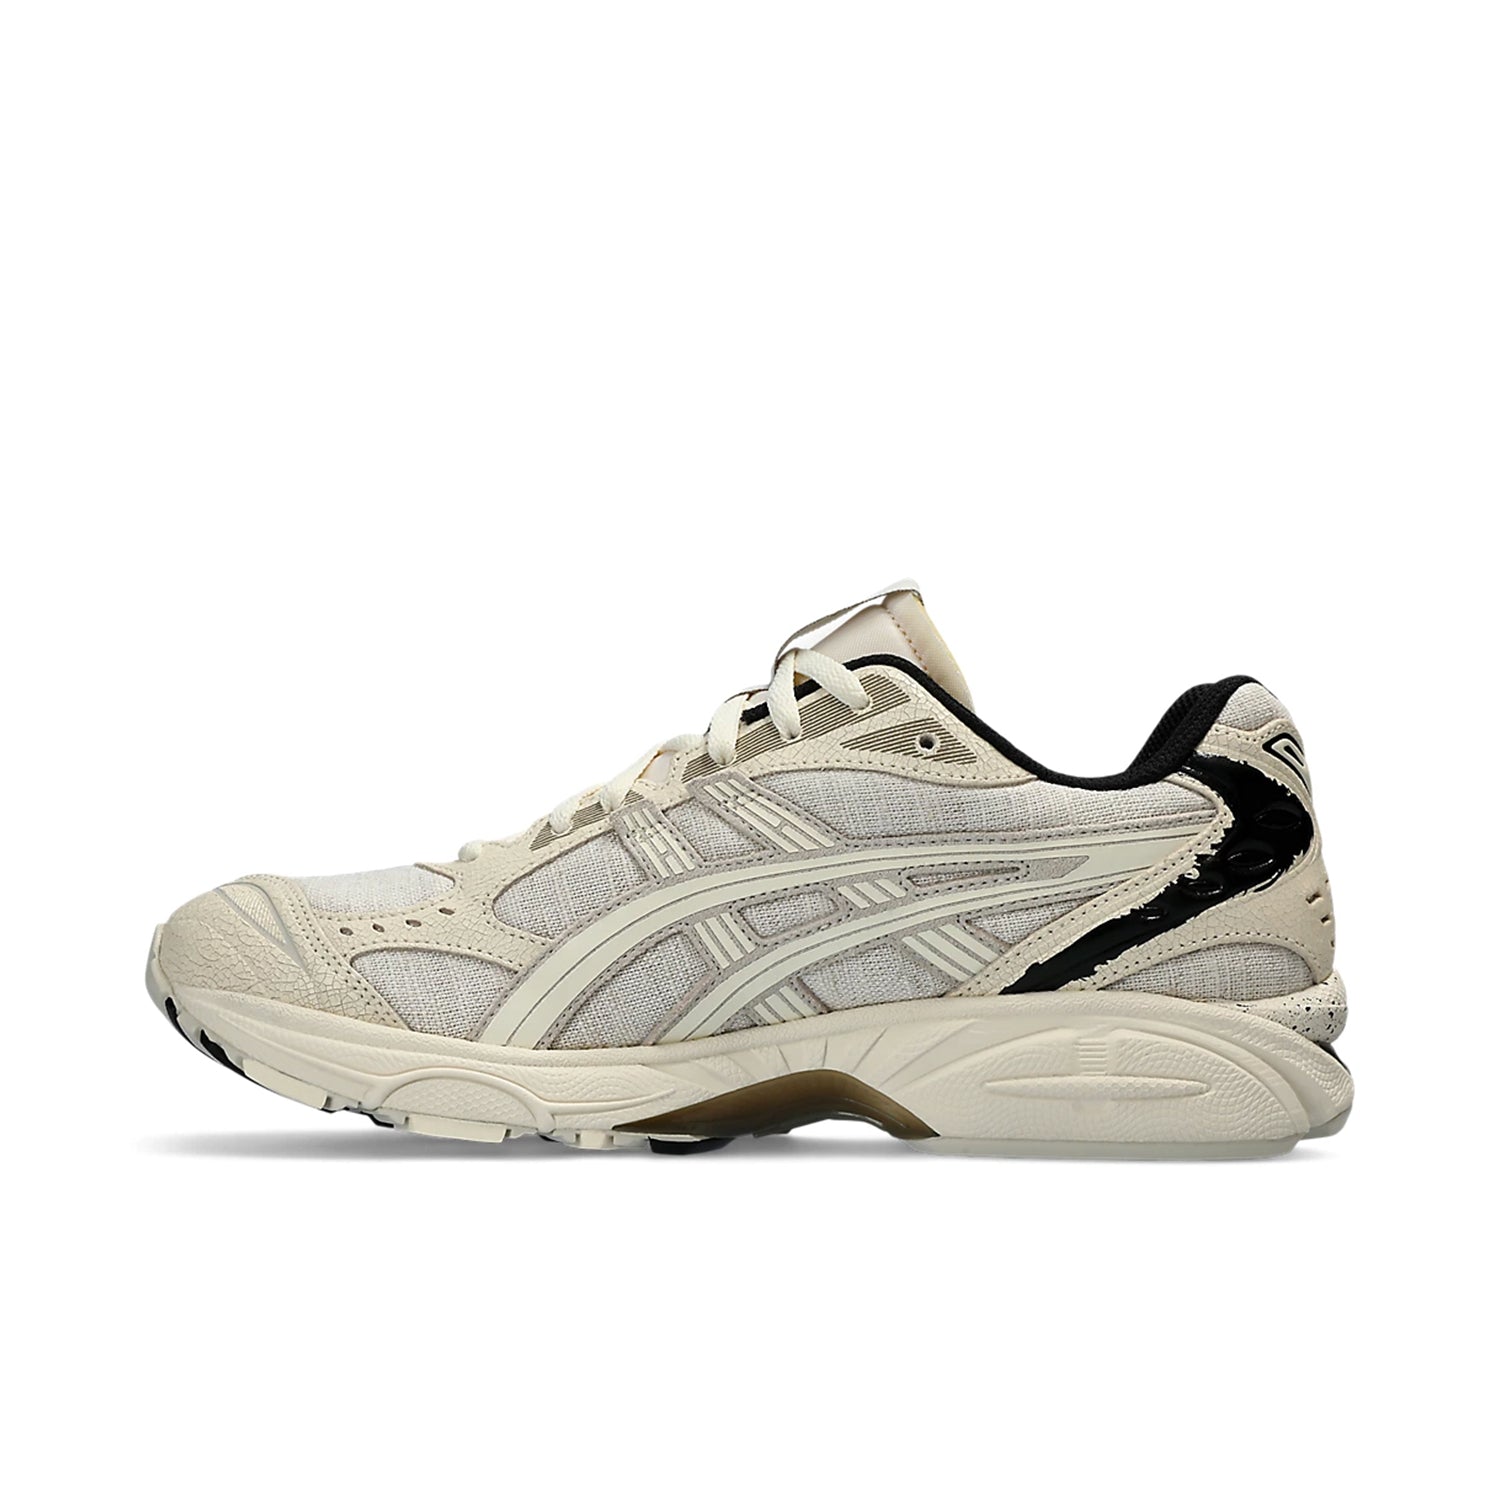 Gel-Kayano 14 Imperfection - INVINCIBLE